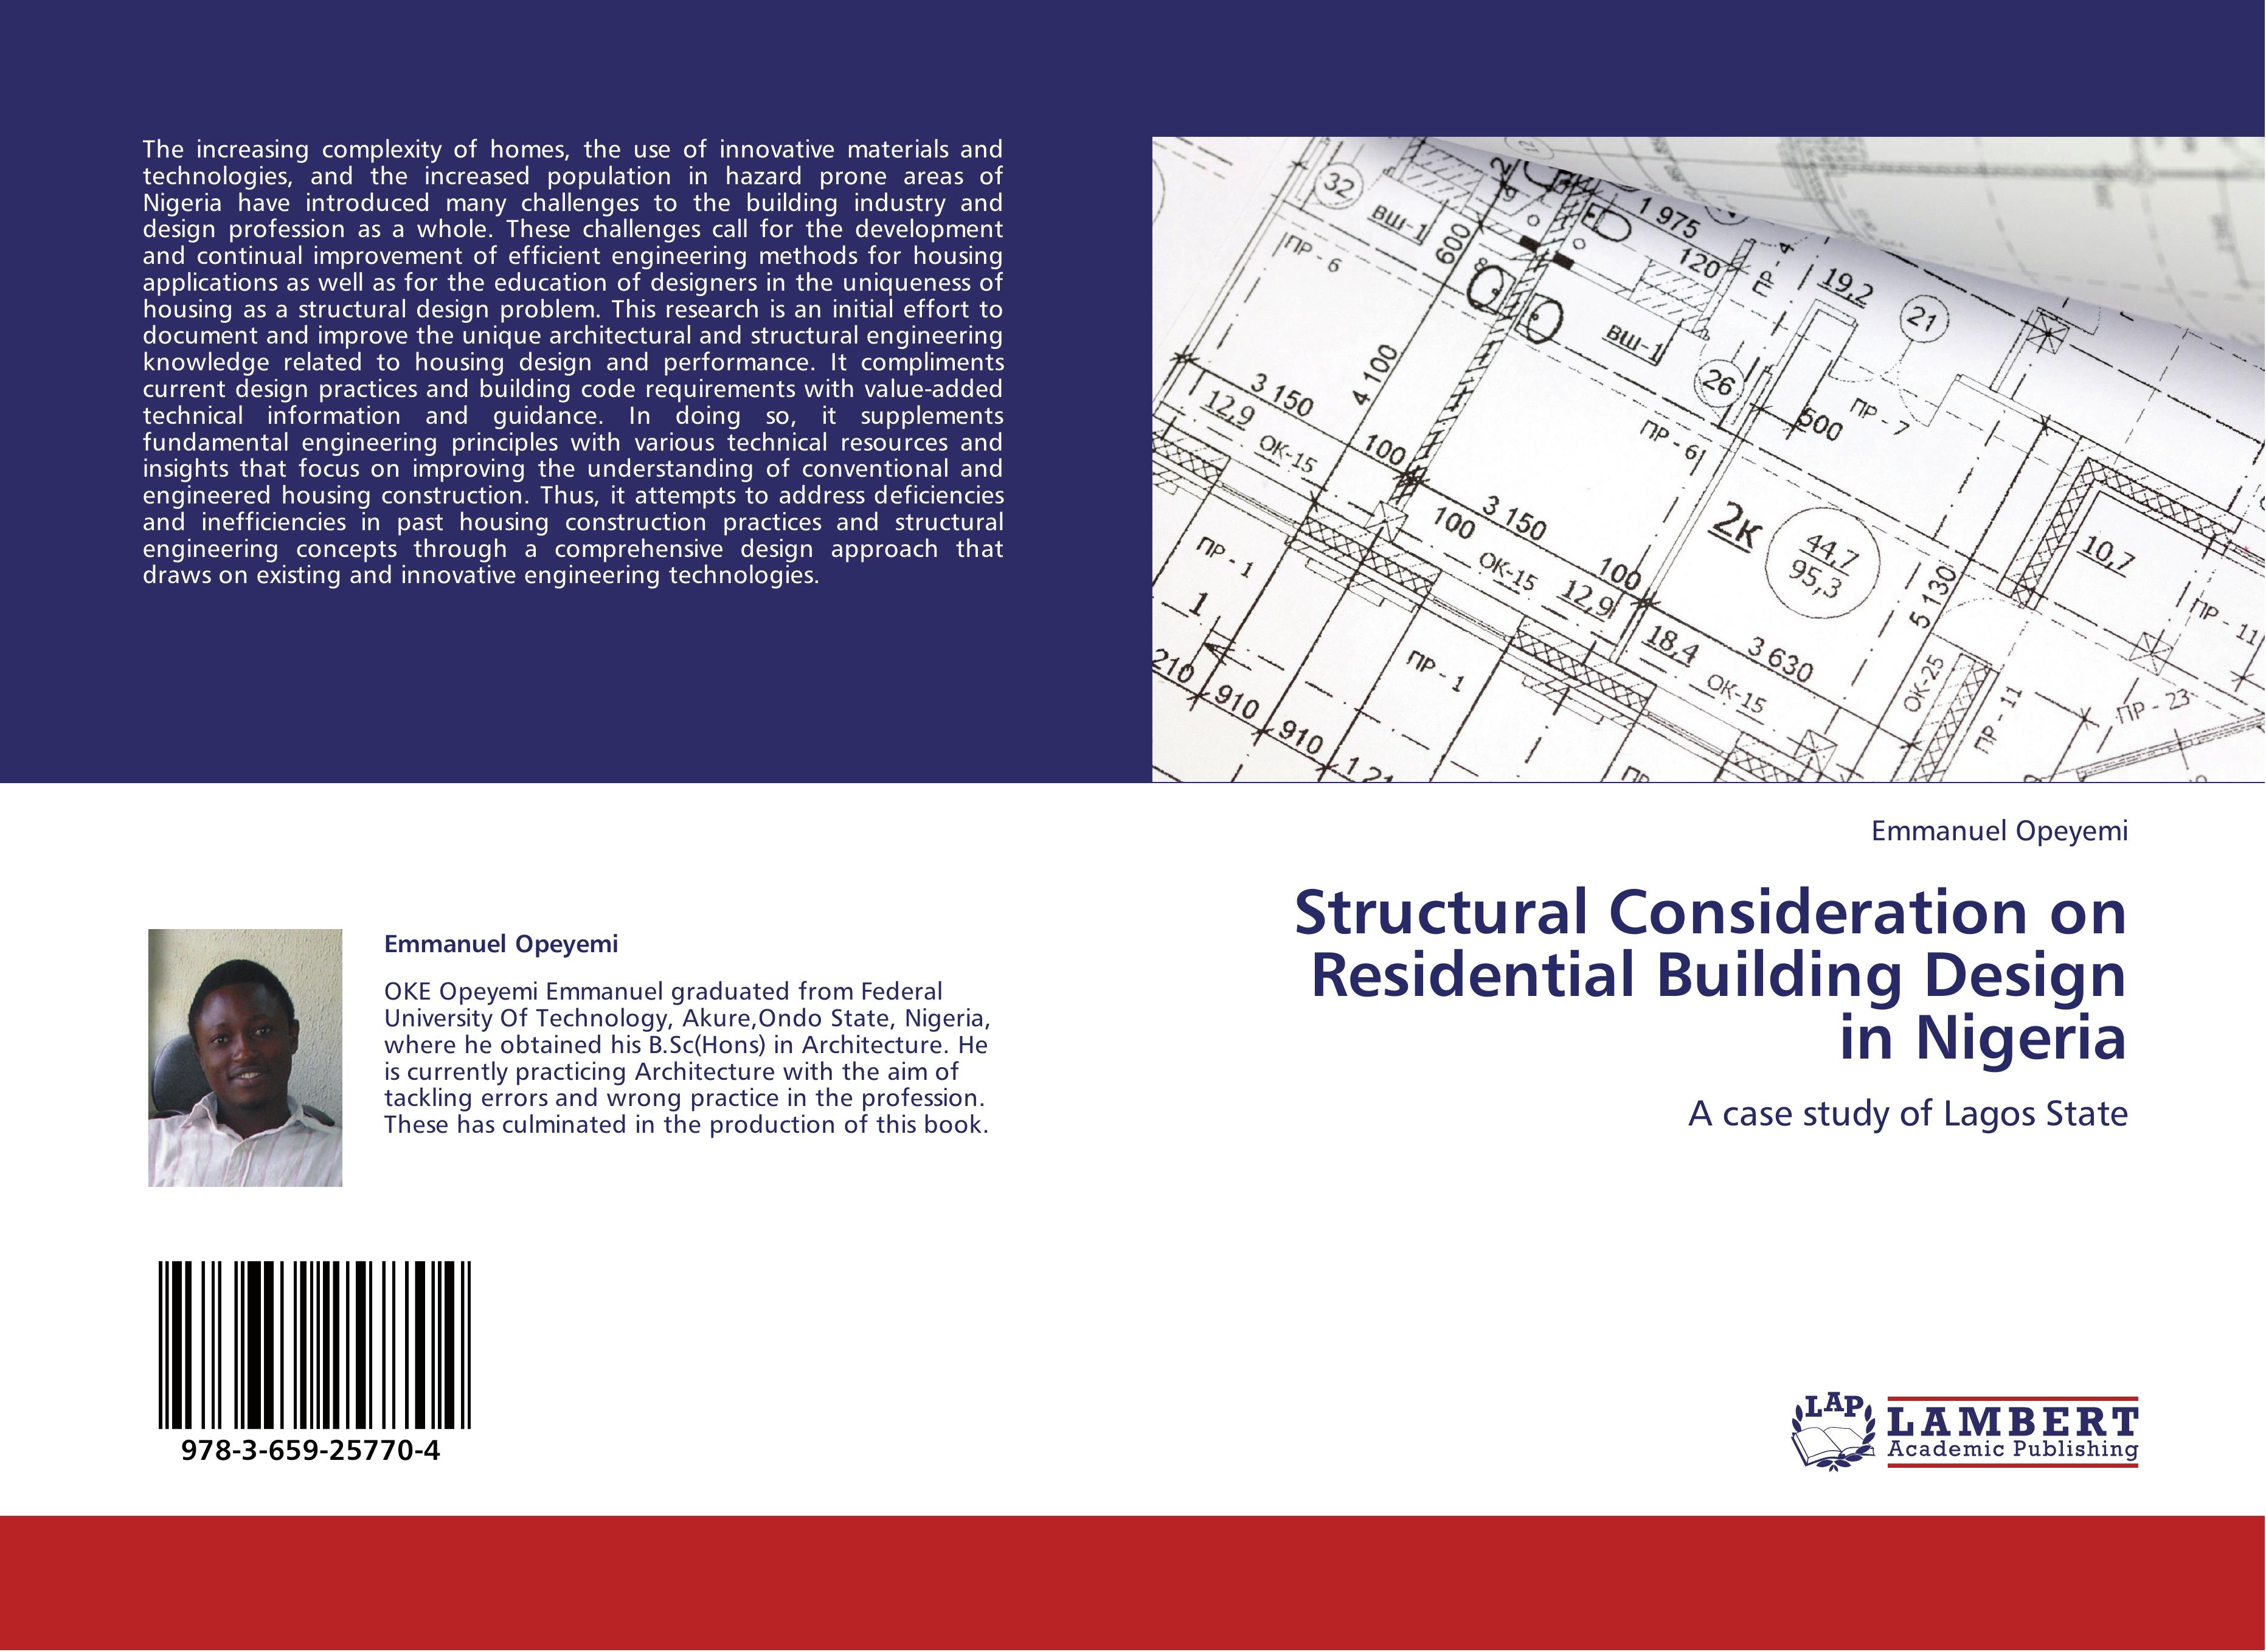 Structural Consideration on Residential Building Design in Nigeria / A case study of Lagos State / Emmanuel Opeyemi / Taschenbuch / Paperback / 88 S. / Englisch / 2012 / EAN 9783659257704 - Opeyemi, Emmanuel